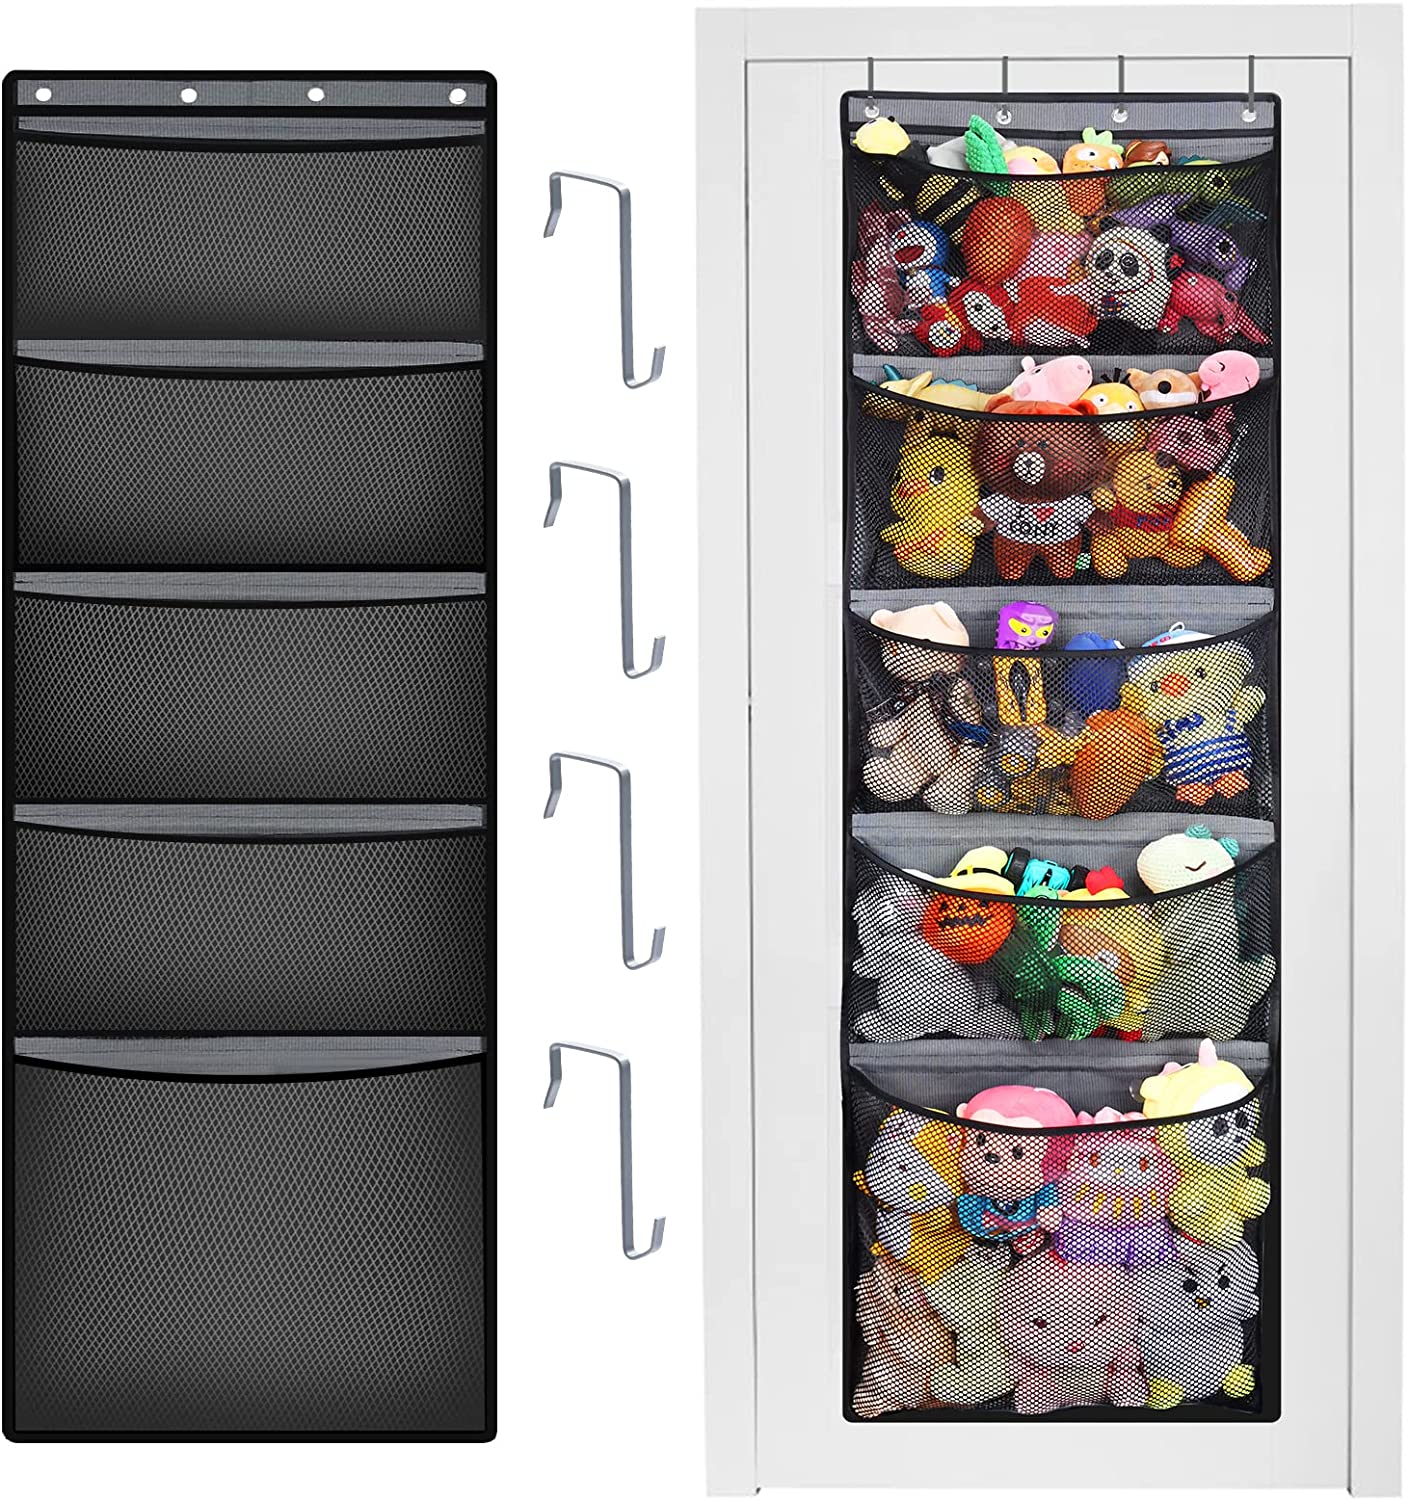 ''Fentec STUFFED ANIMAL Storage, 5 Large Pockets Over The Door STUFFED ANIMALs Organizer for Kid's To